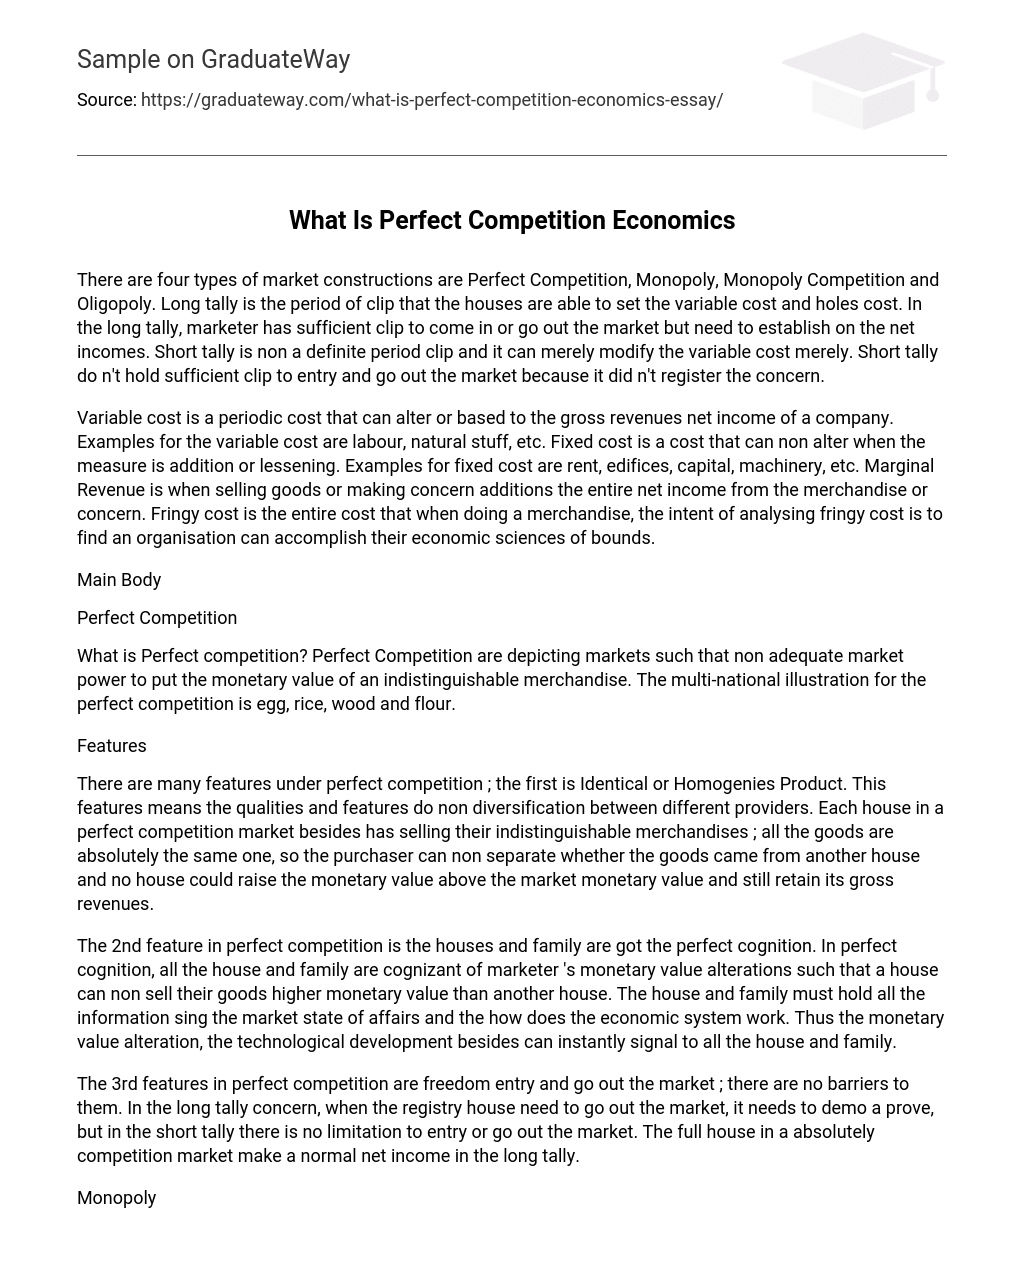 What Is Perfect Competition Economics